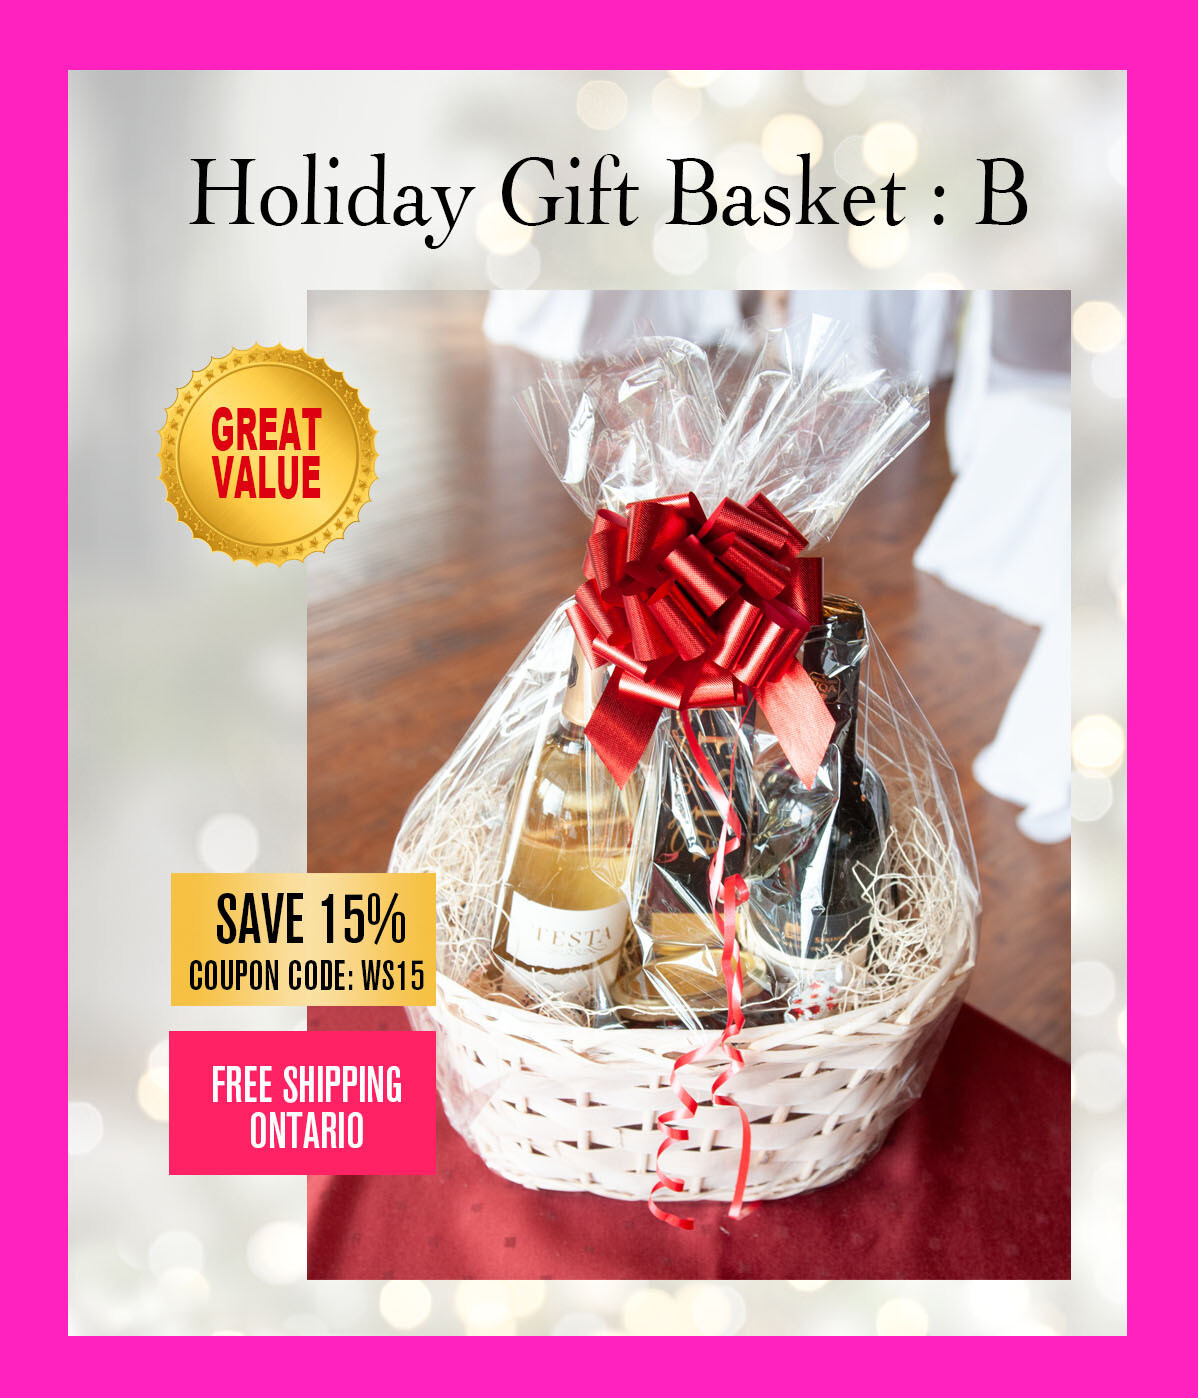 Holiday Gift Basket: B (Value of $175)